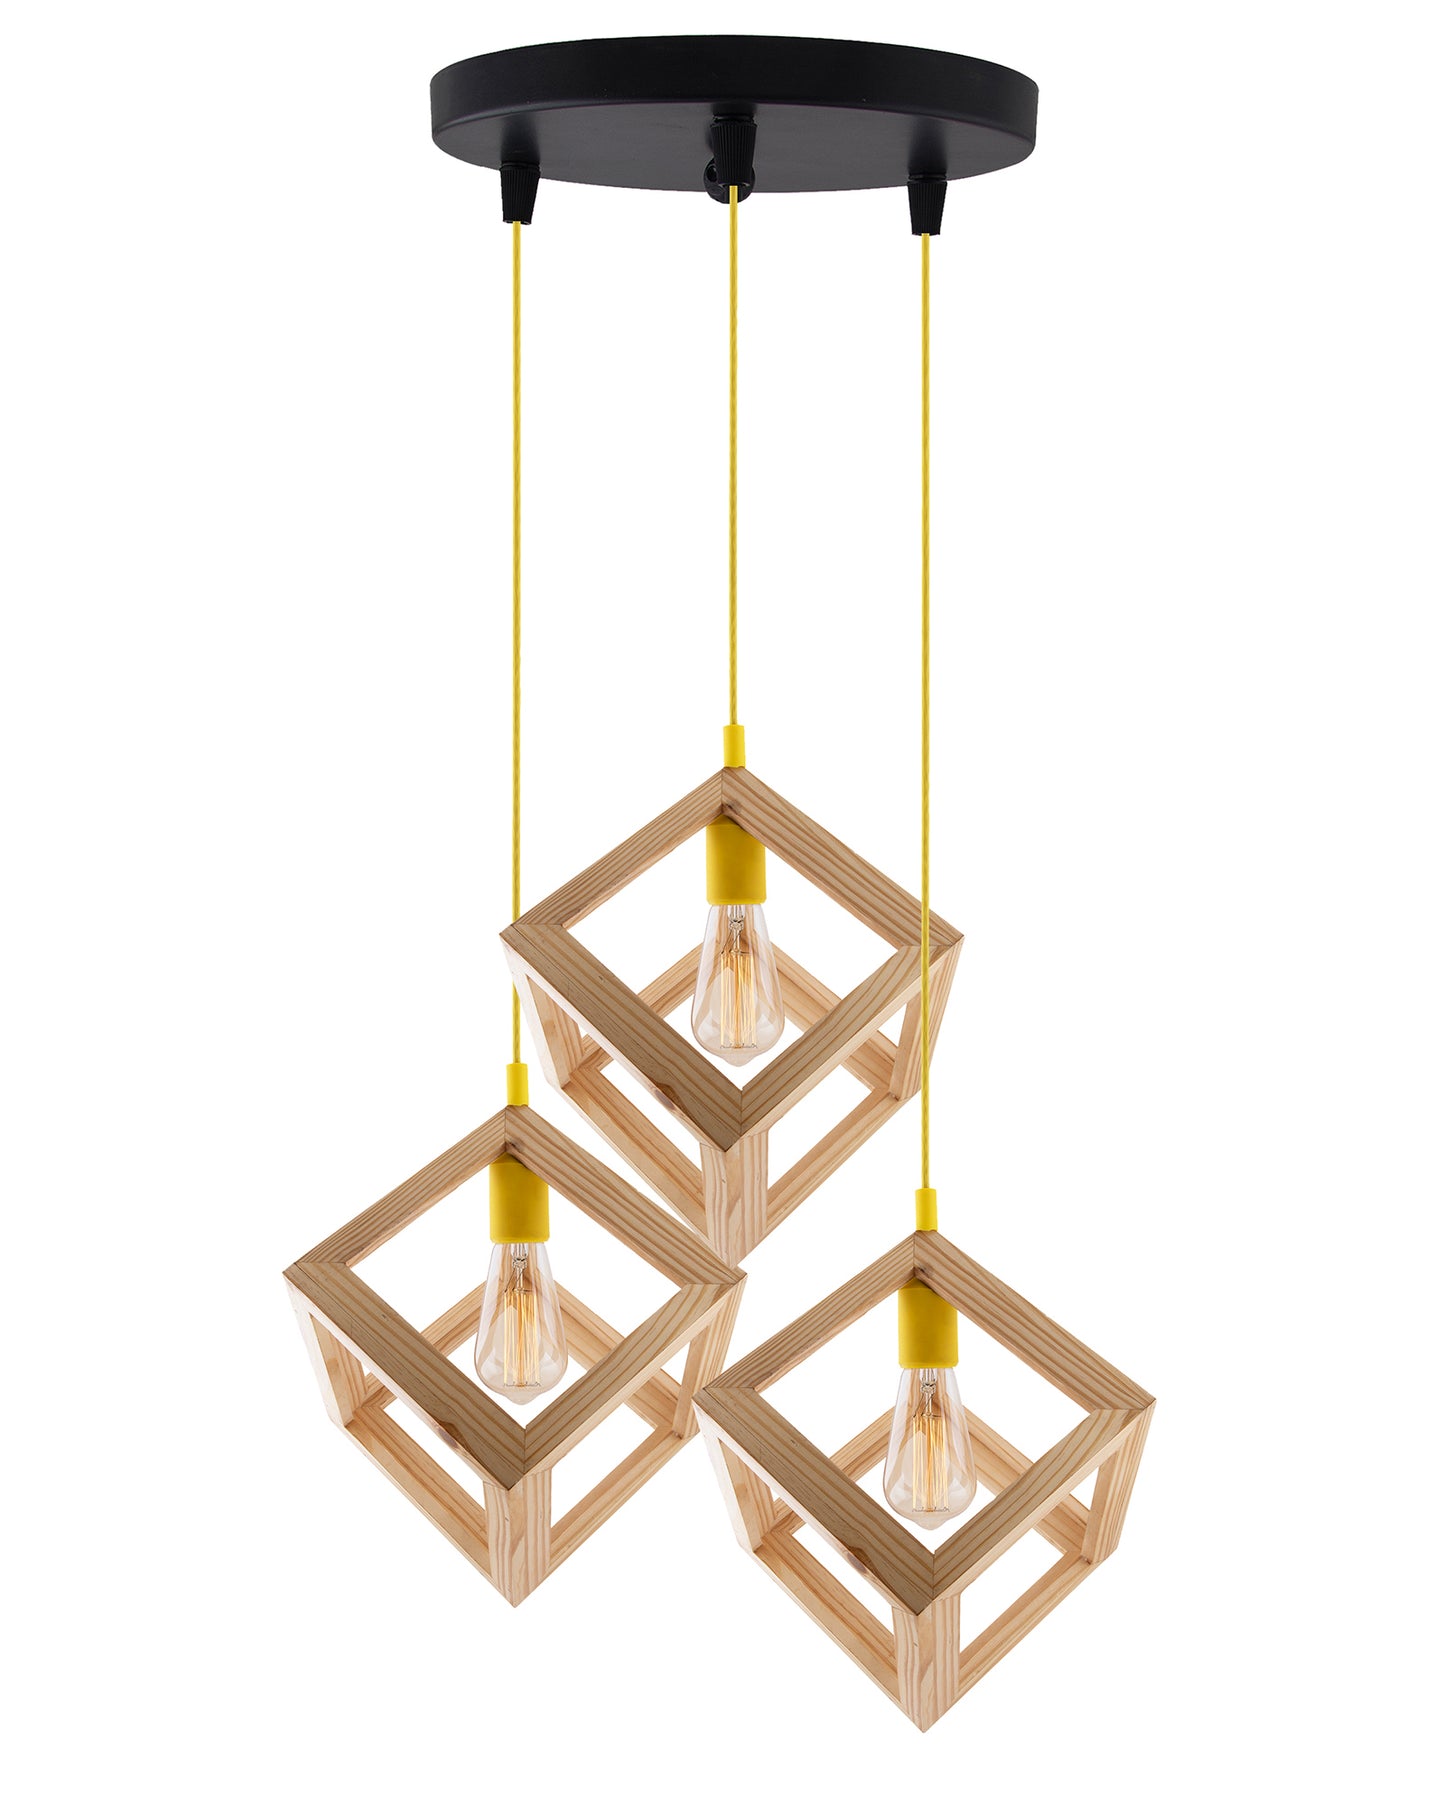 3-Lights Round Cluster Chandelier Modern Nordic Wooden Pendant Cube Light with Silicone Holder, URBAN Retro, Nordic Style, LED/Filament Bulb